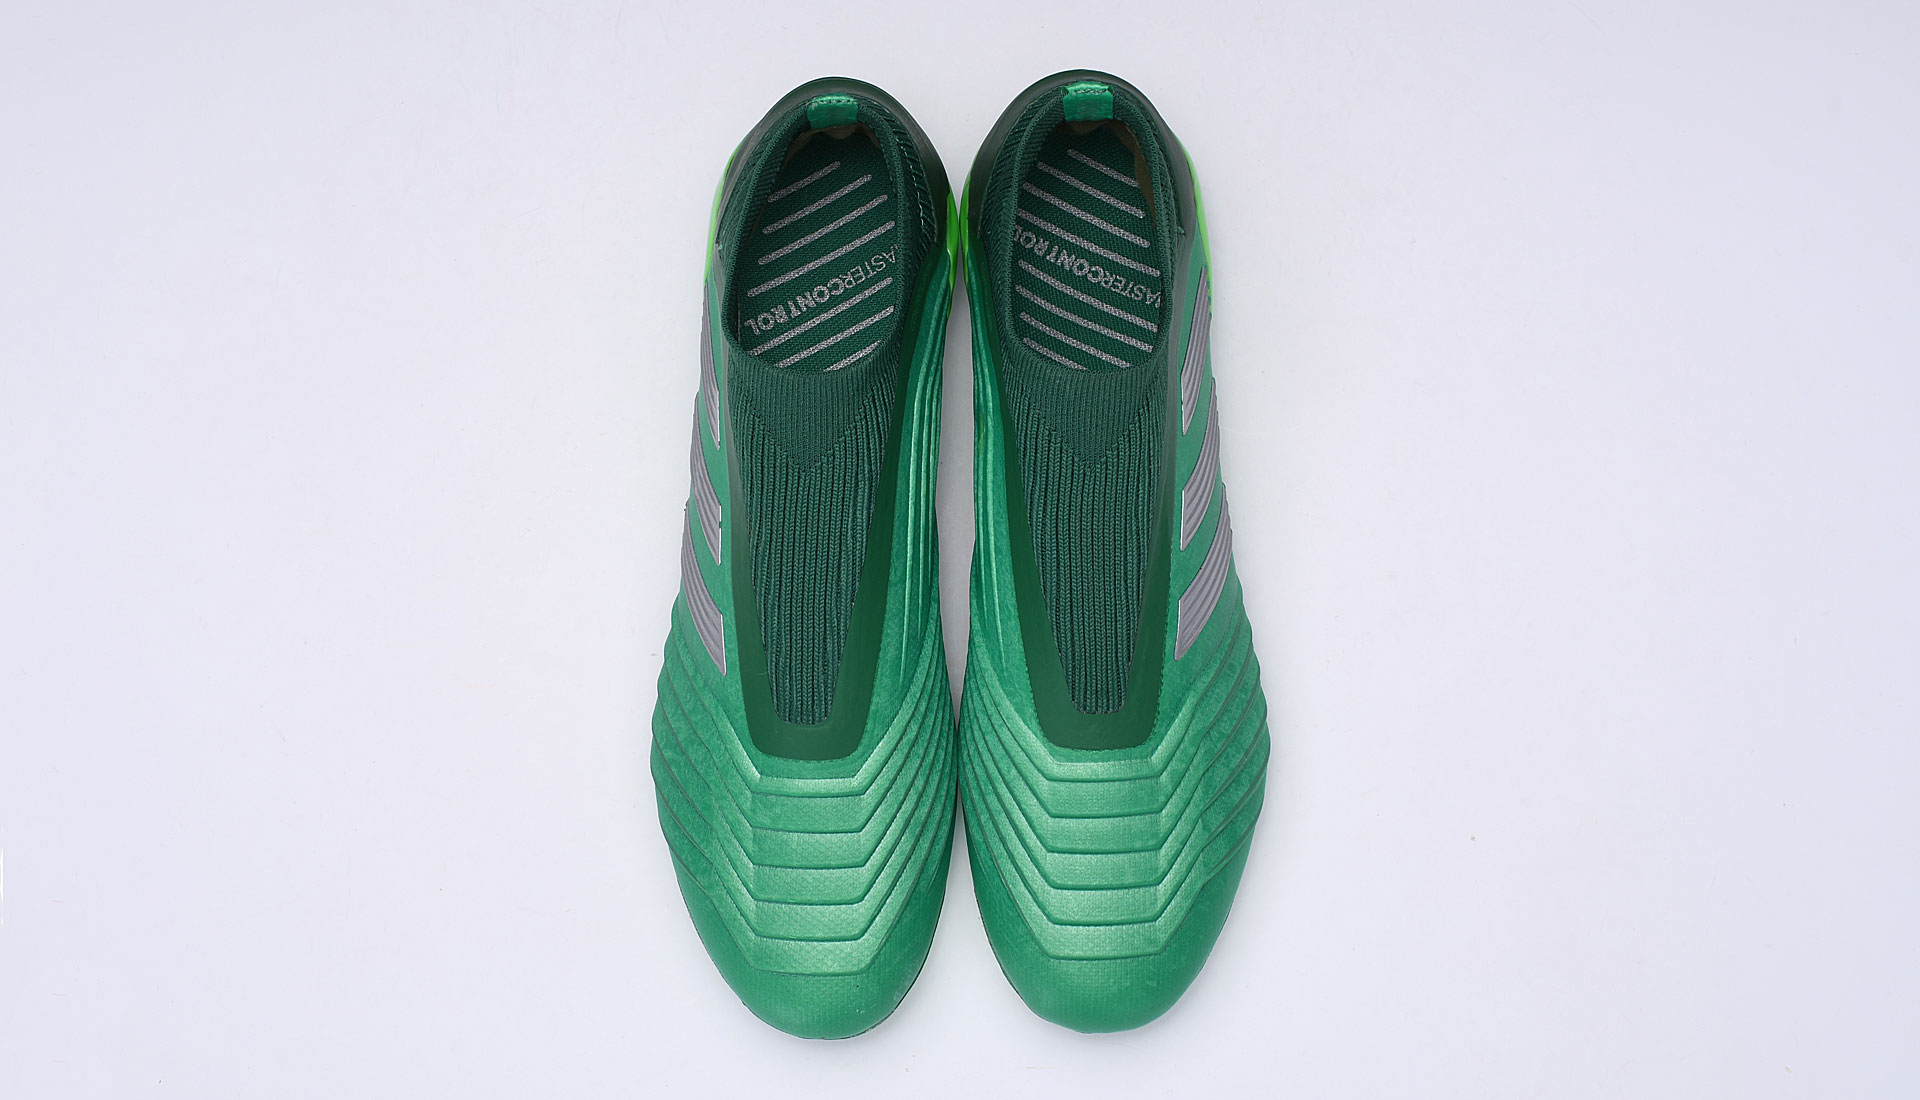 Adidas Predator 19+ FG Soccer Cleats - Green Silver Available Now